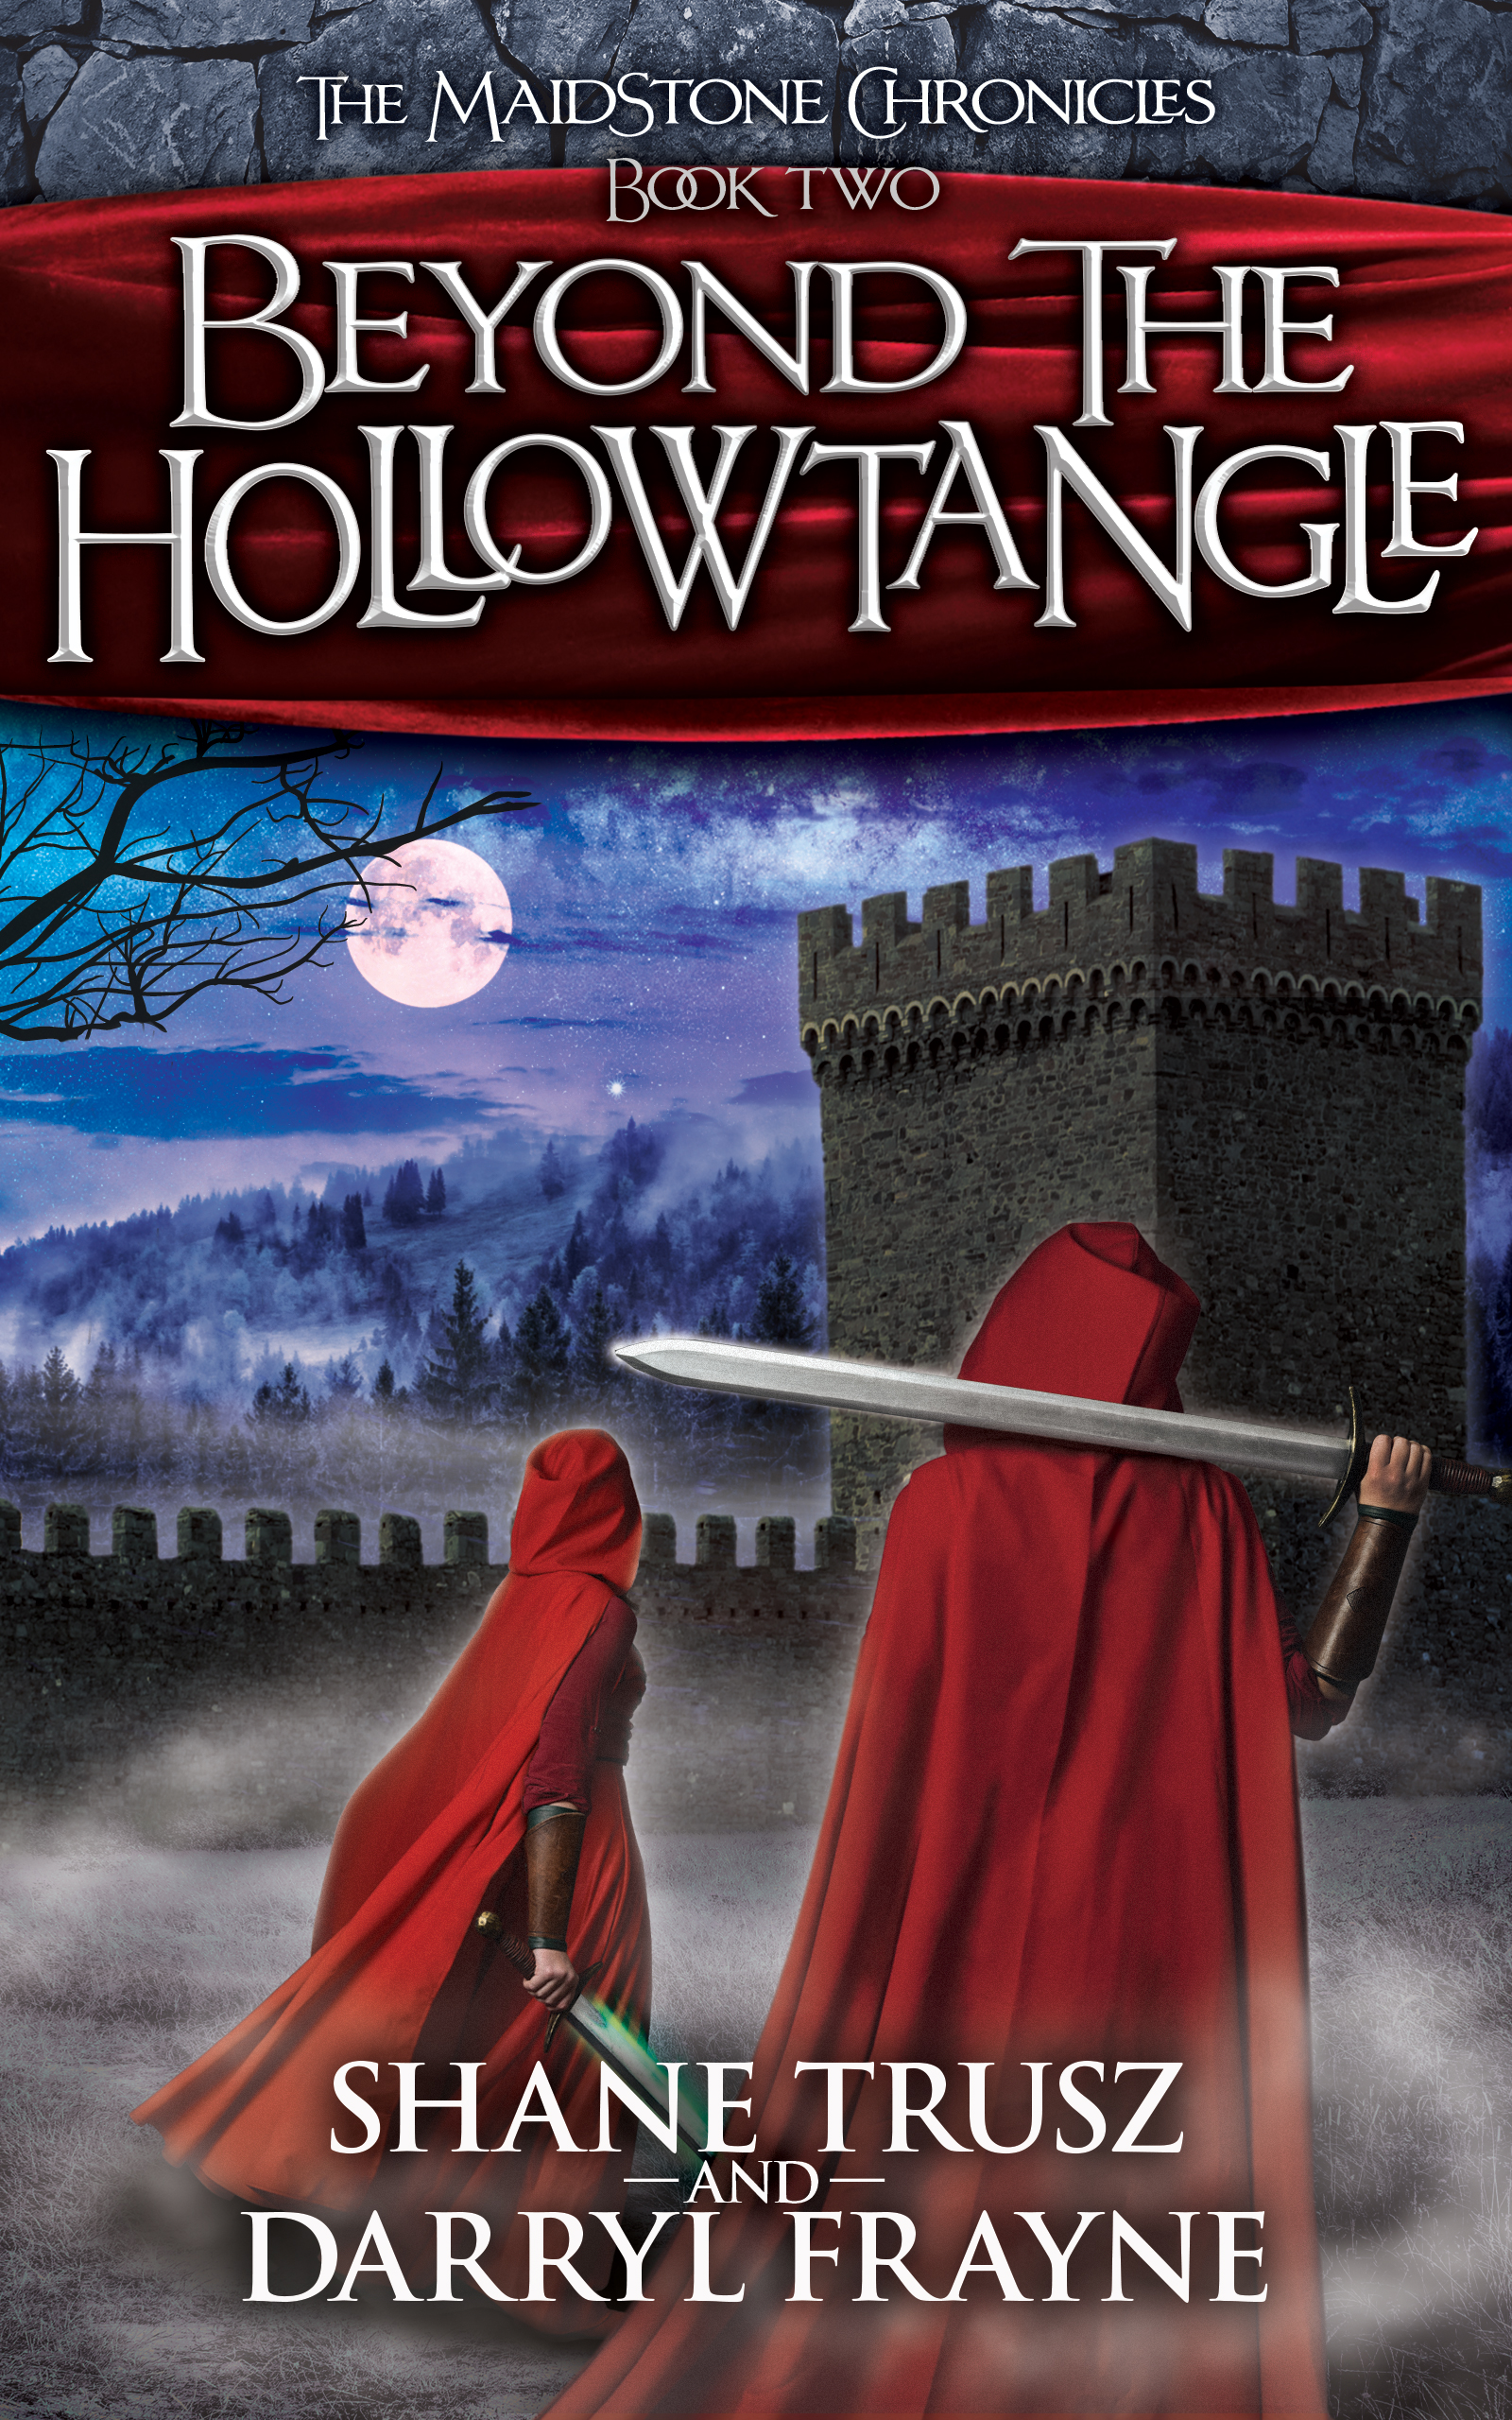 FREE: Beyond the Hollowtangle by Shane Trusz and Darryl Frayne